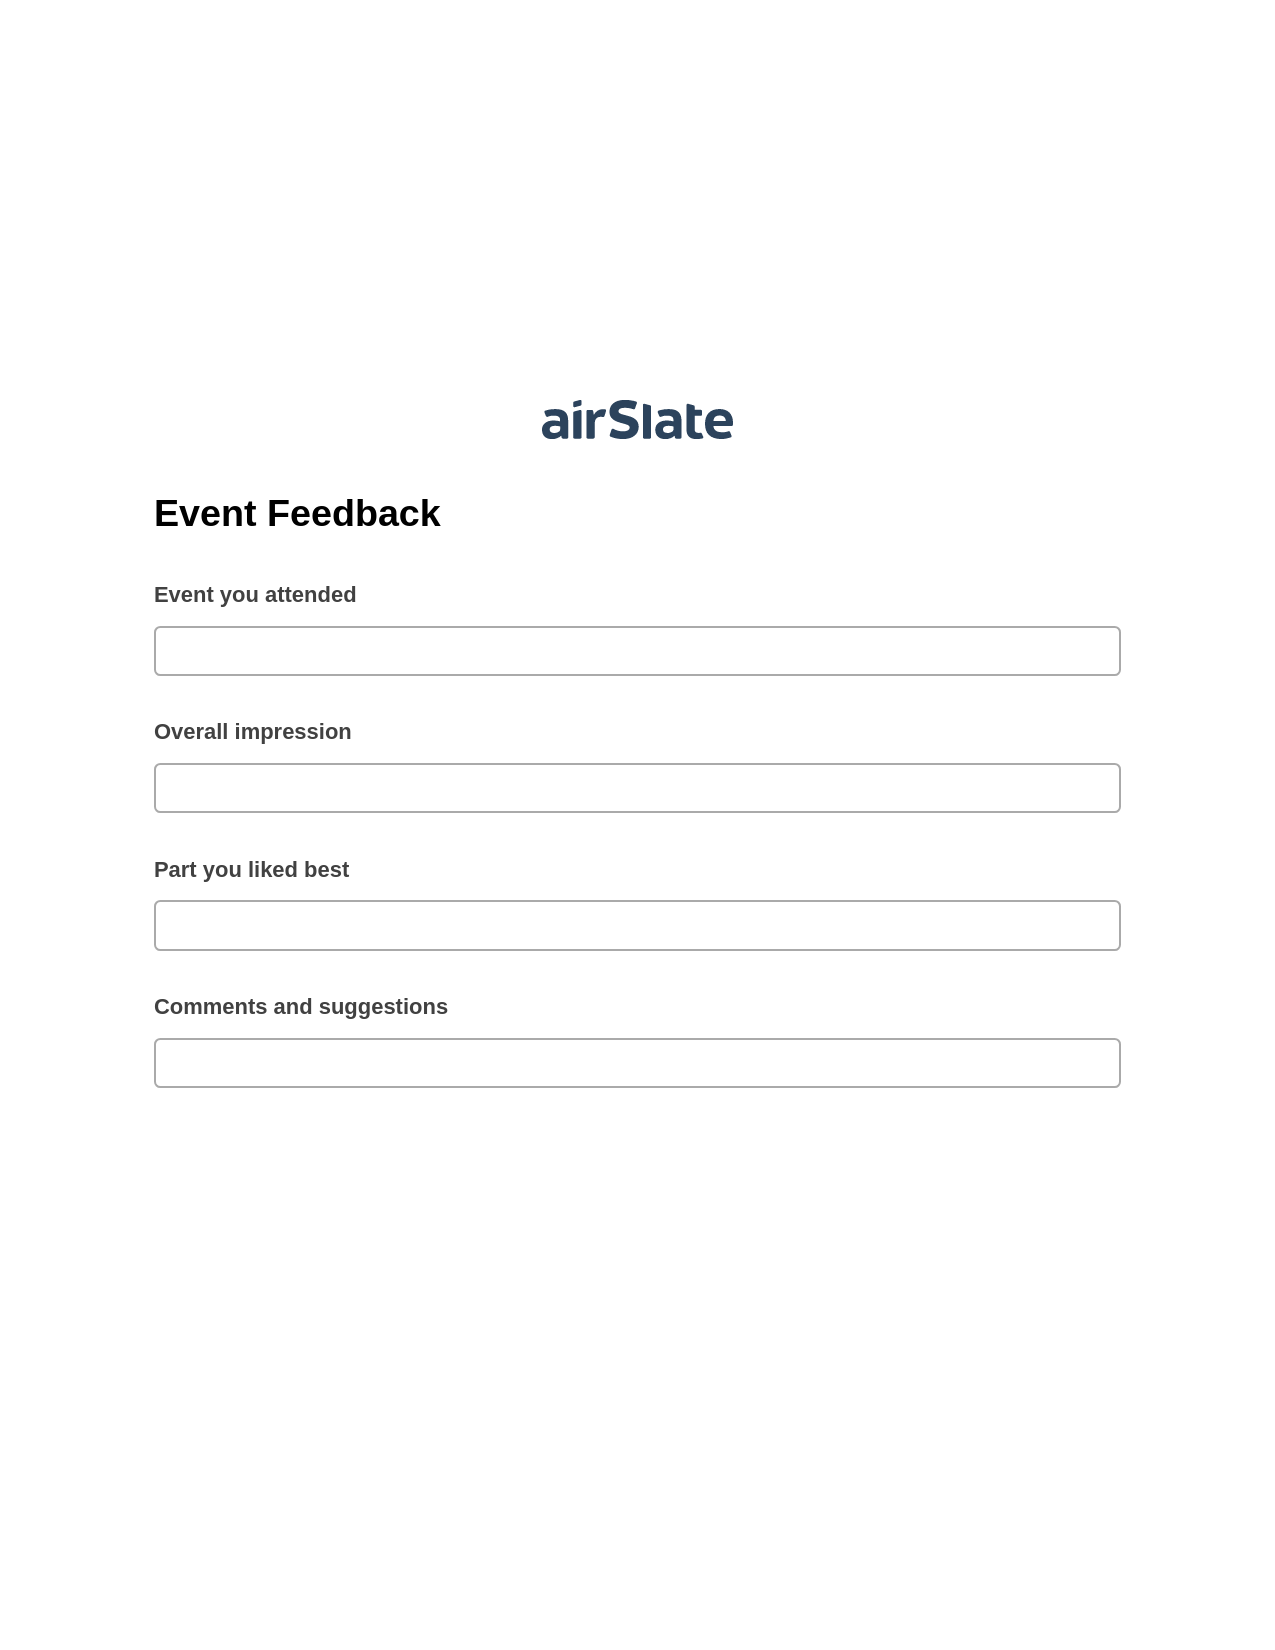 Event Feedback Pre-fill Dropdown from Airtable, Reminder Bot, Google Drive Bot